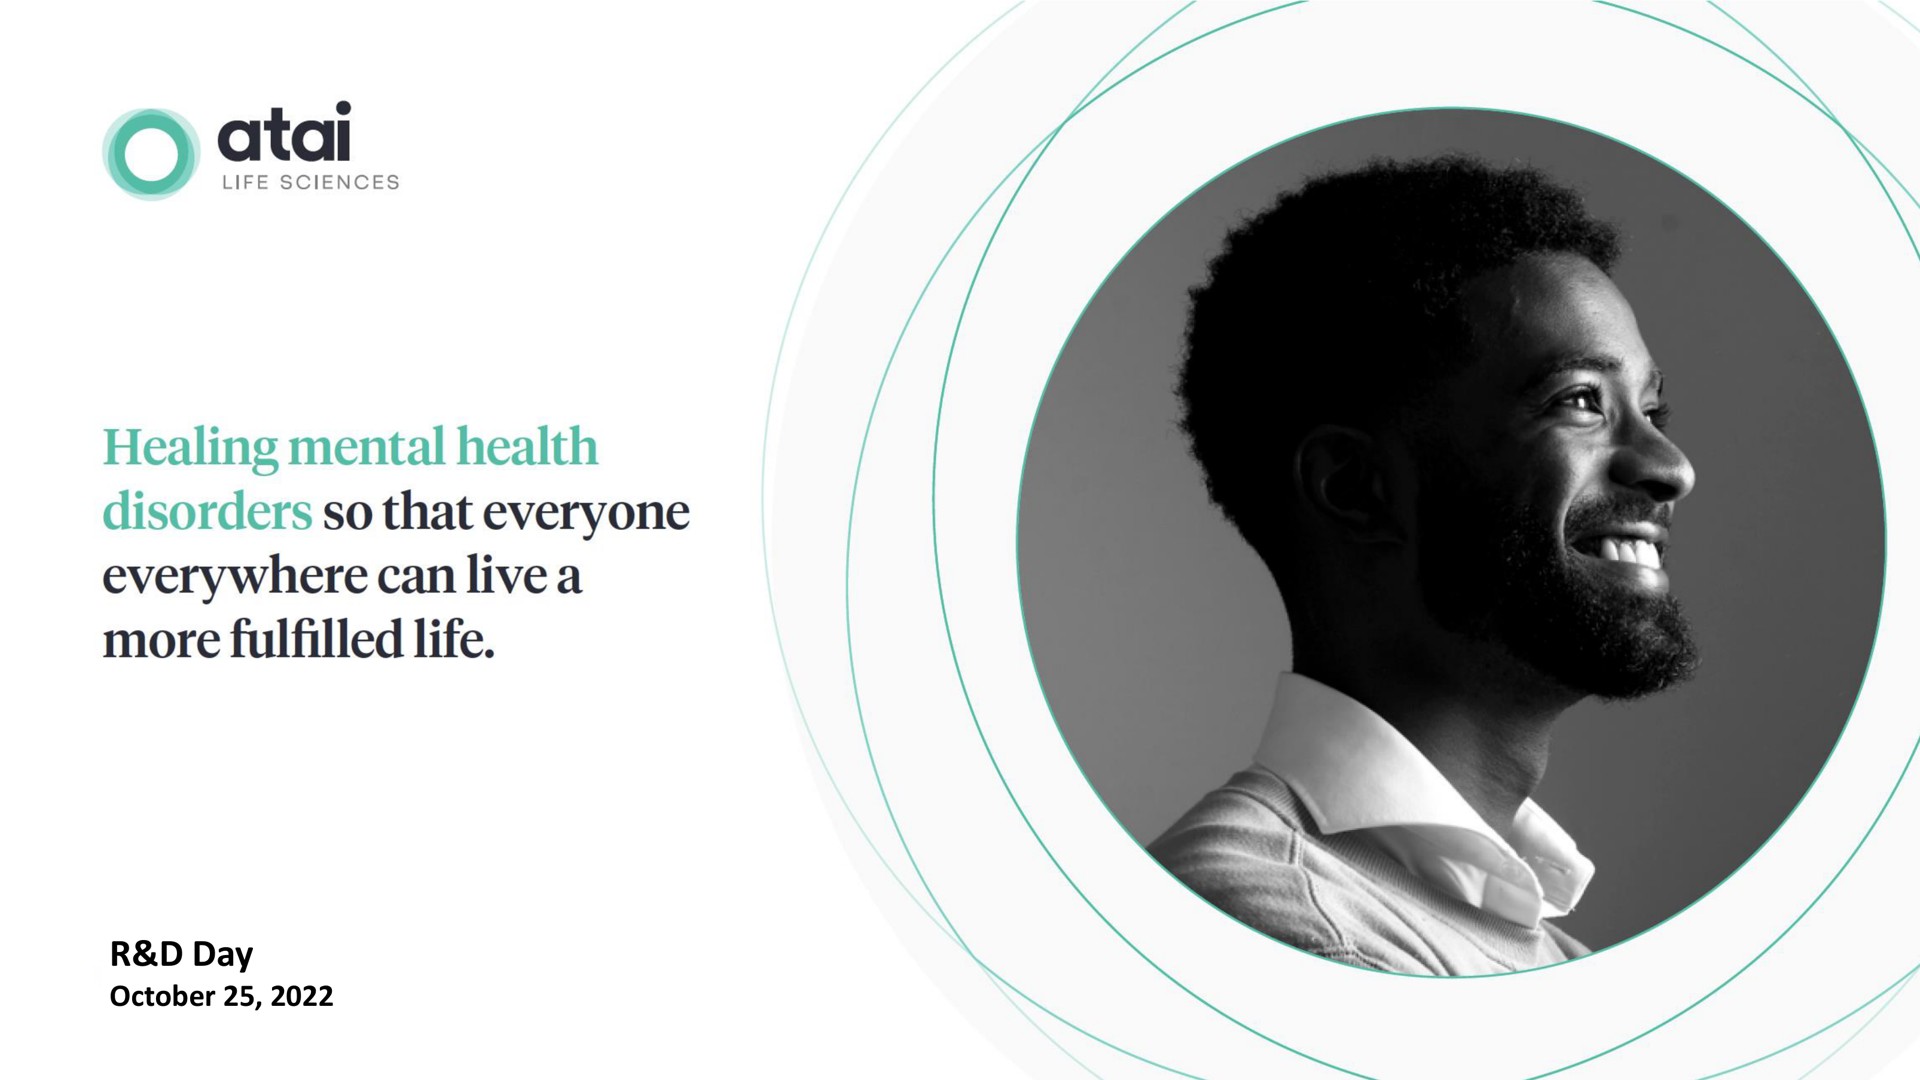 day company overview healing mental health disorders so that everyone everywhere can live a more life | ATAI